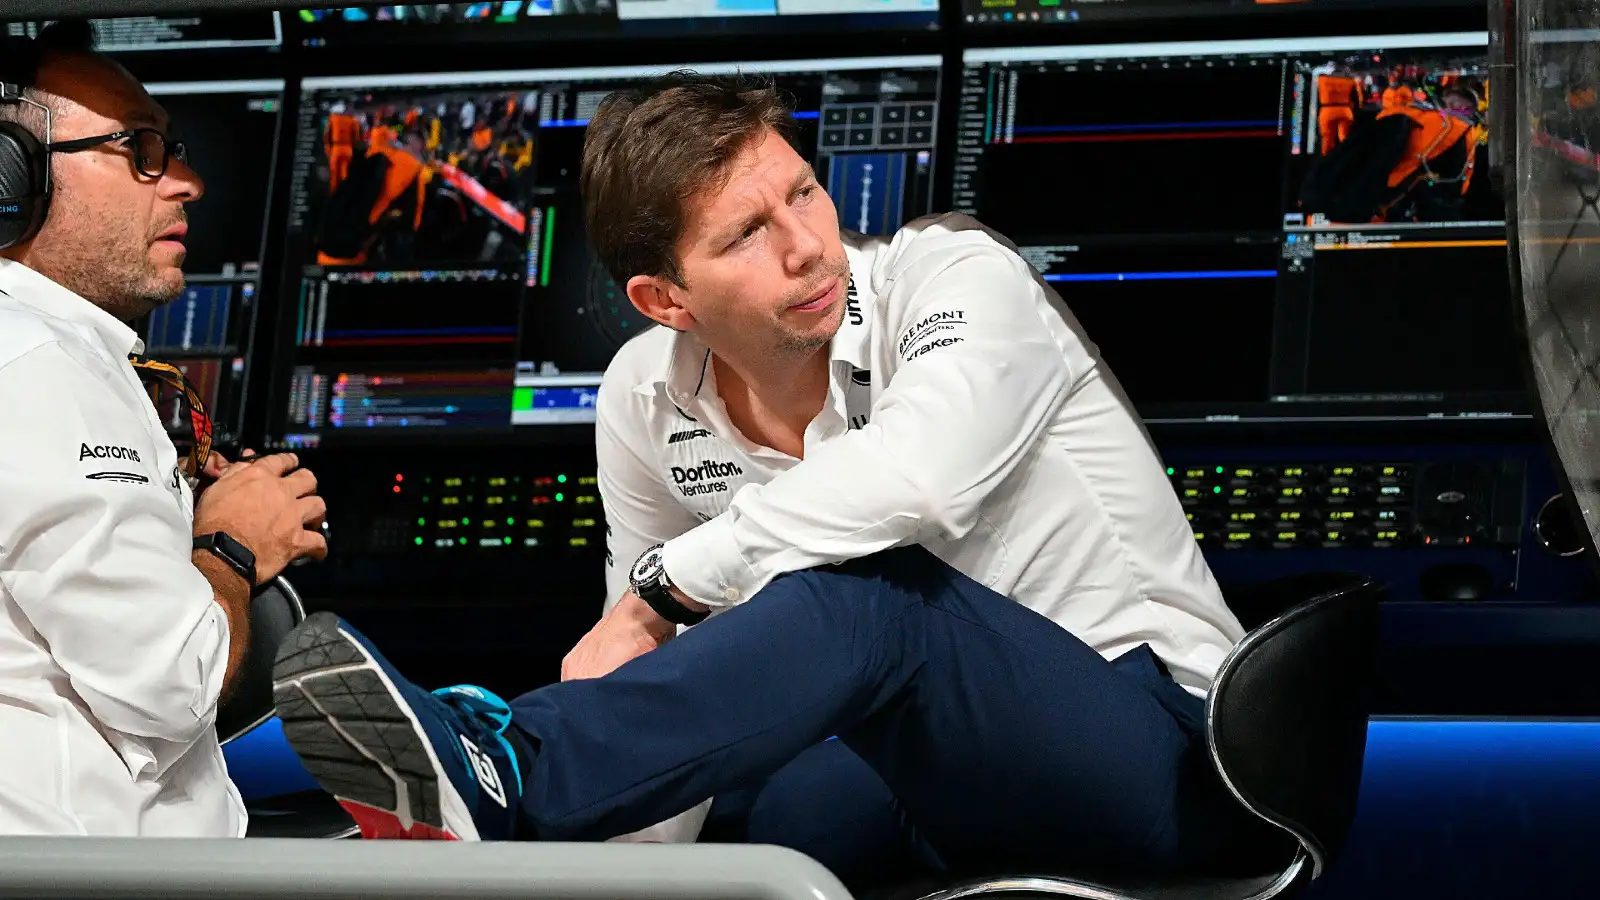 James Vowles praises F1 regulations for promoting changes to pecking order  throughout season